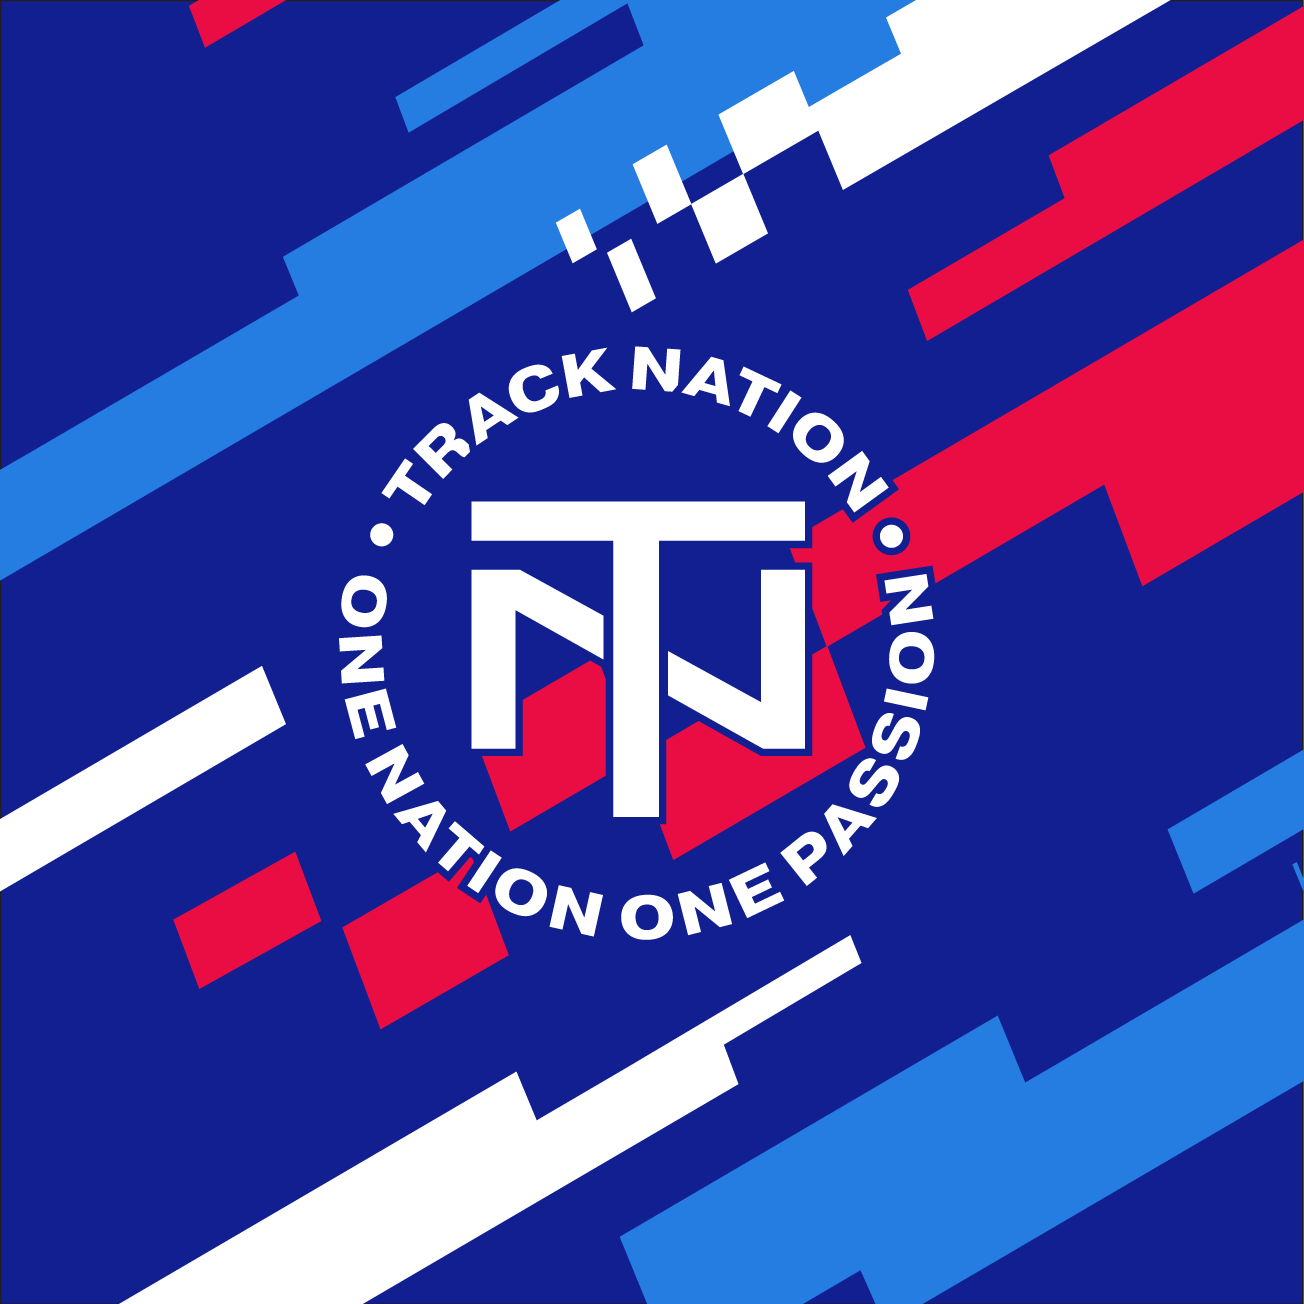 Club Image for TRACK NATION